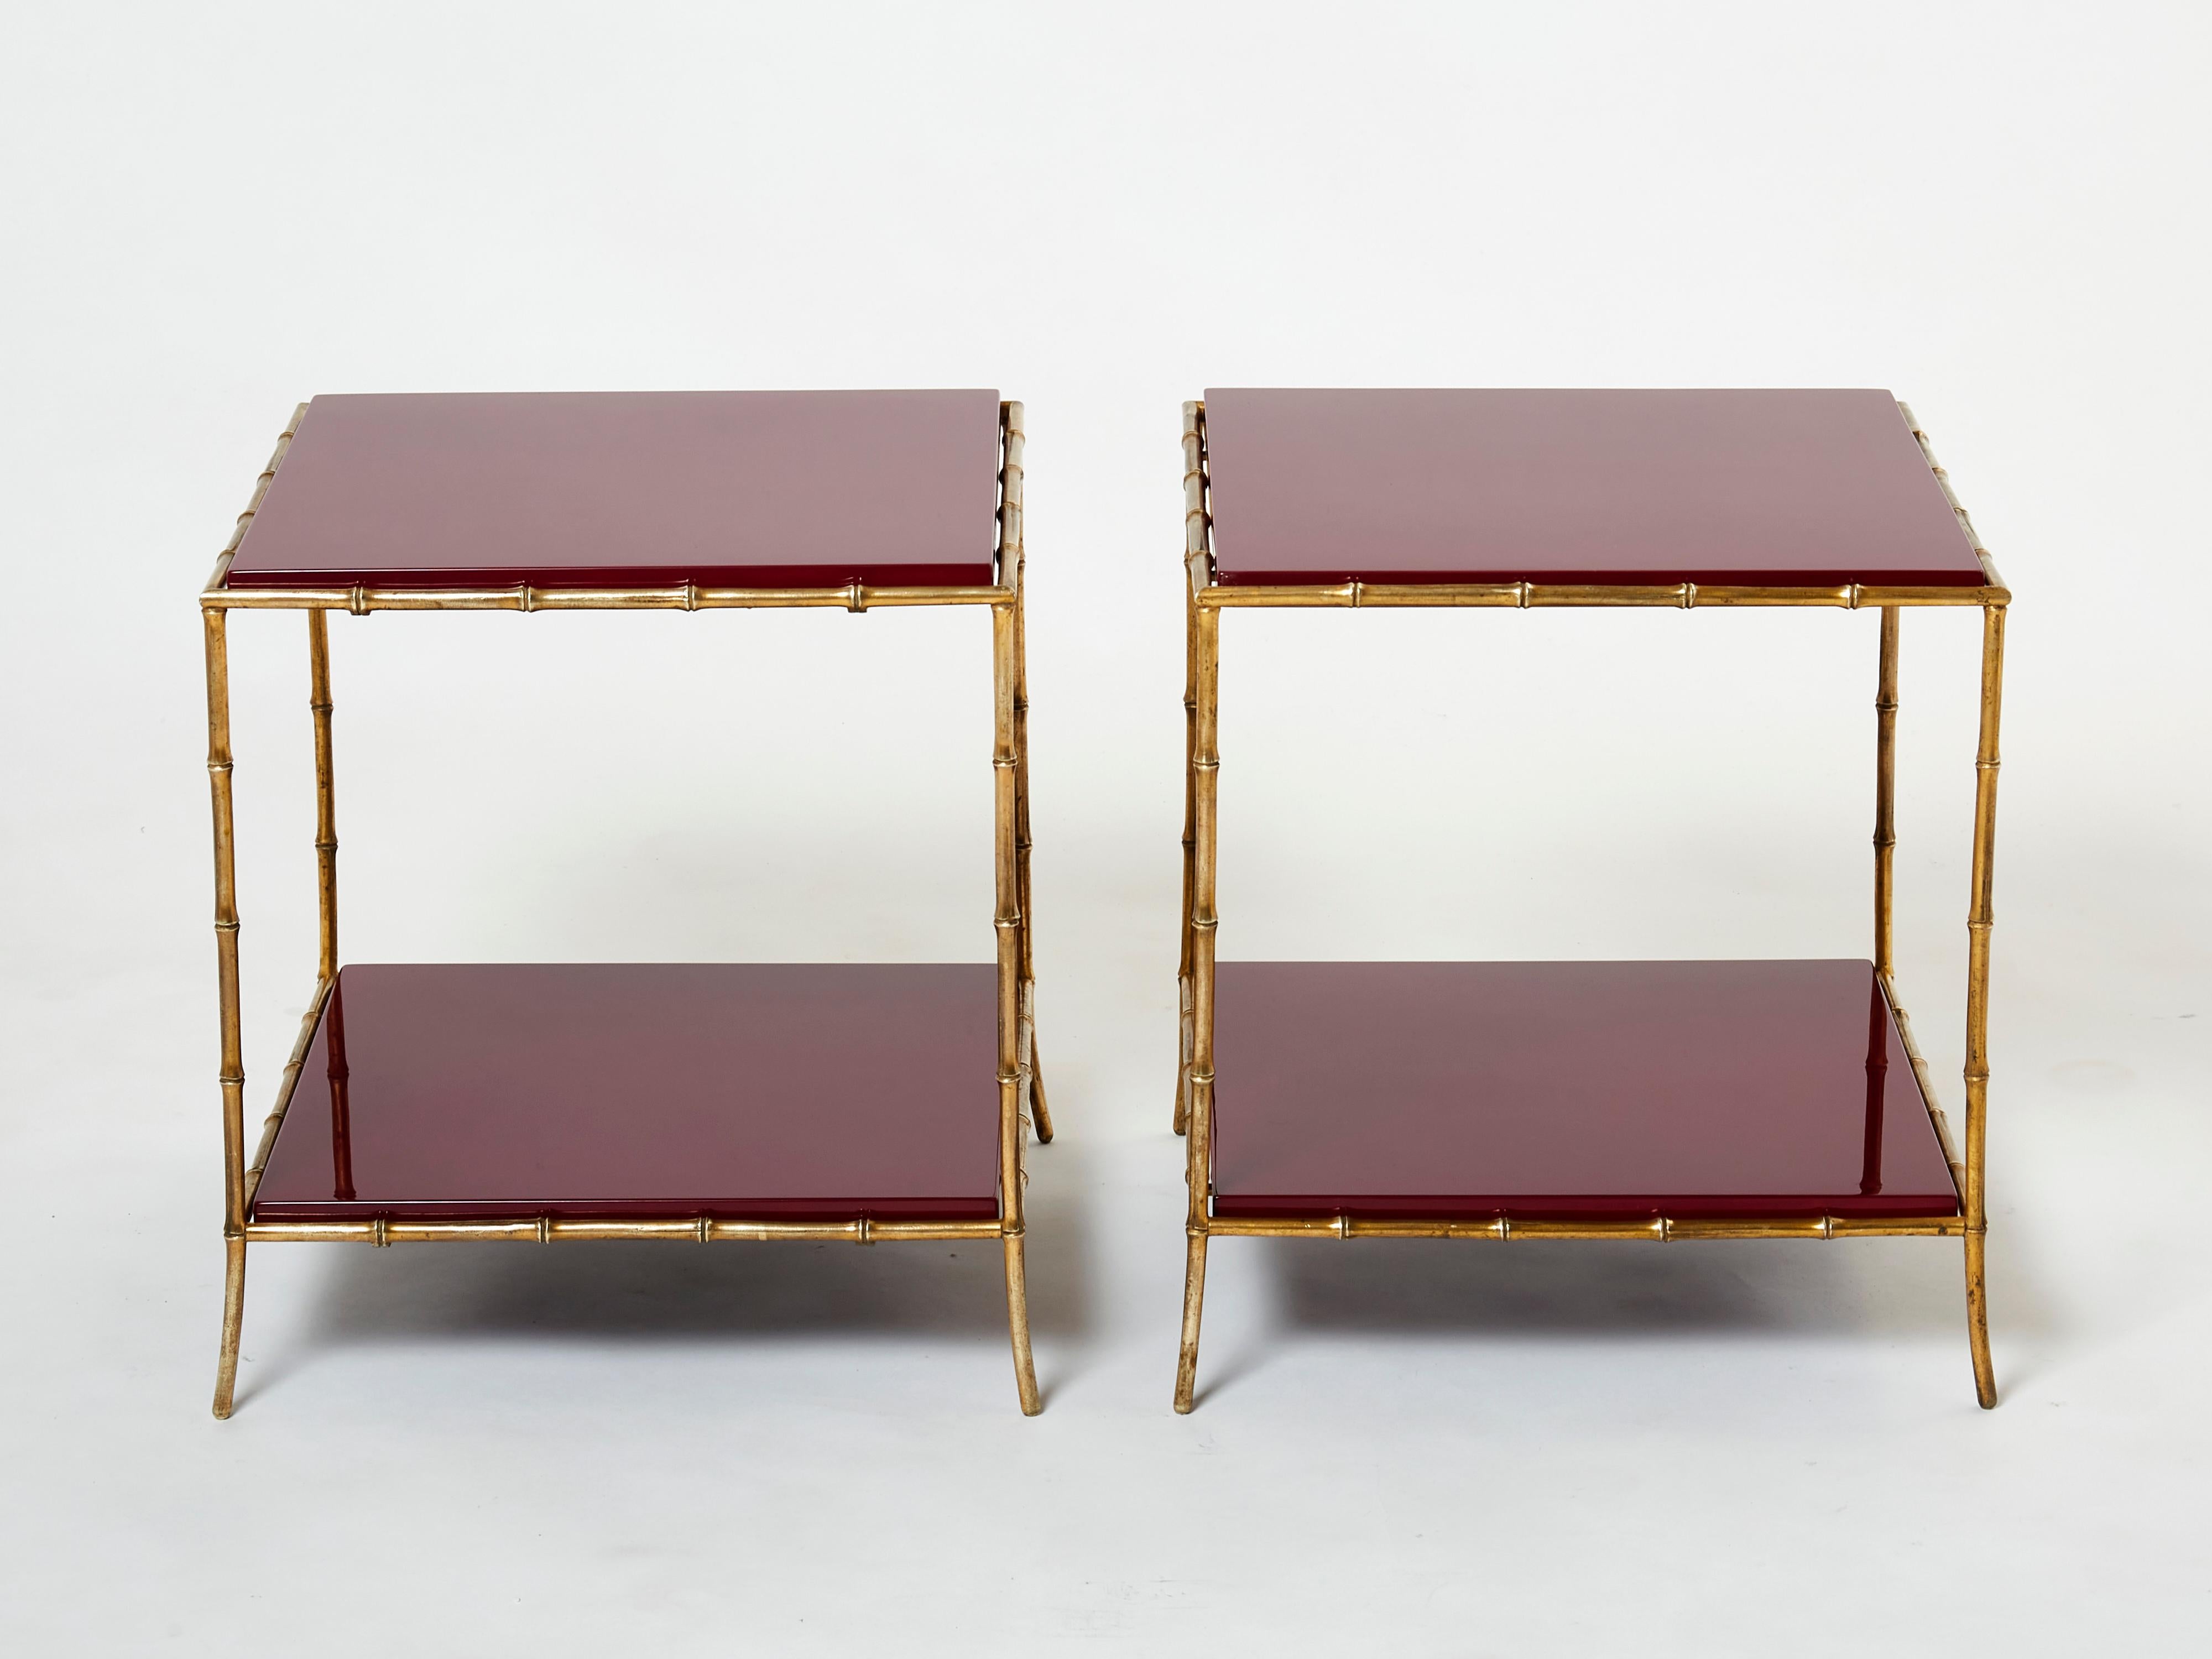 This beautiful pair of two-tier end tables by French house Maison Baguès was created with solid bamboo shaped brass and beautiful garnet red lacquer tops in the early 1960s. The lacquered tops are timeless and smooth, while the brass bamboo feet